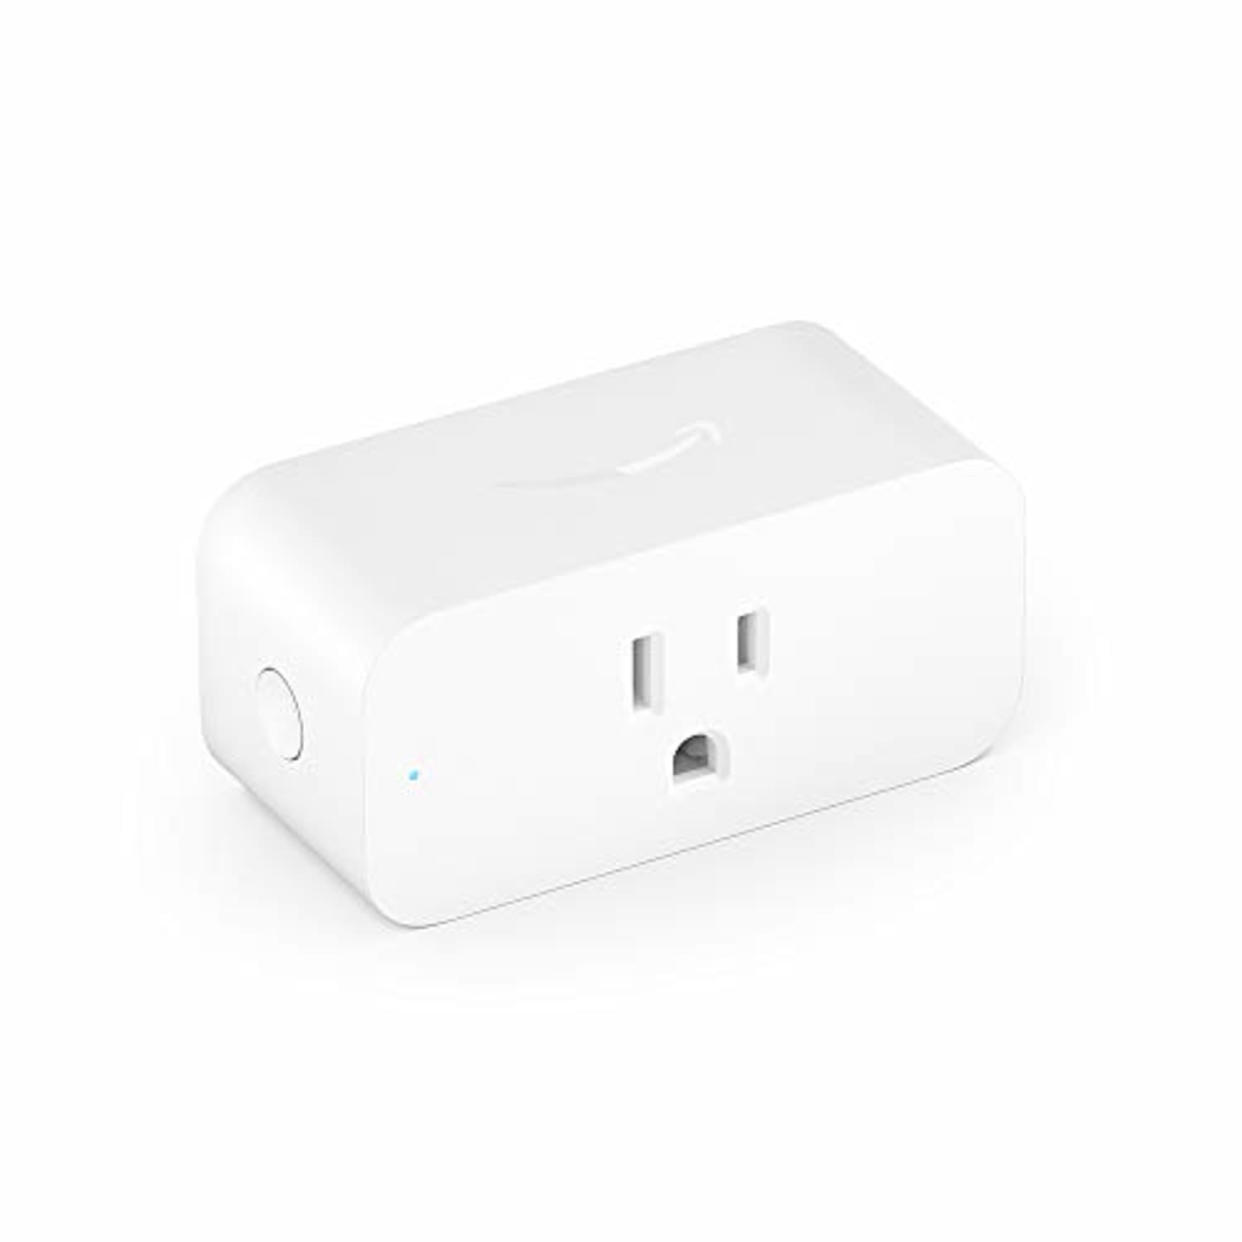 Amazon Smart Plug | Works with Alexa | control lights with voice | easy to set up and use (AMAZON)